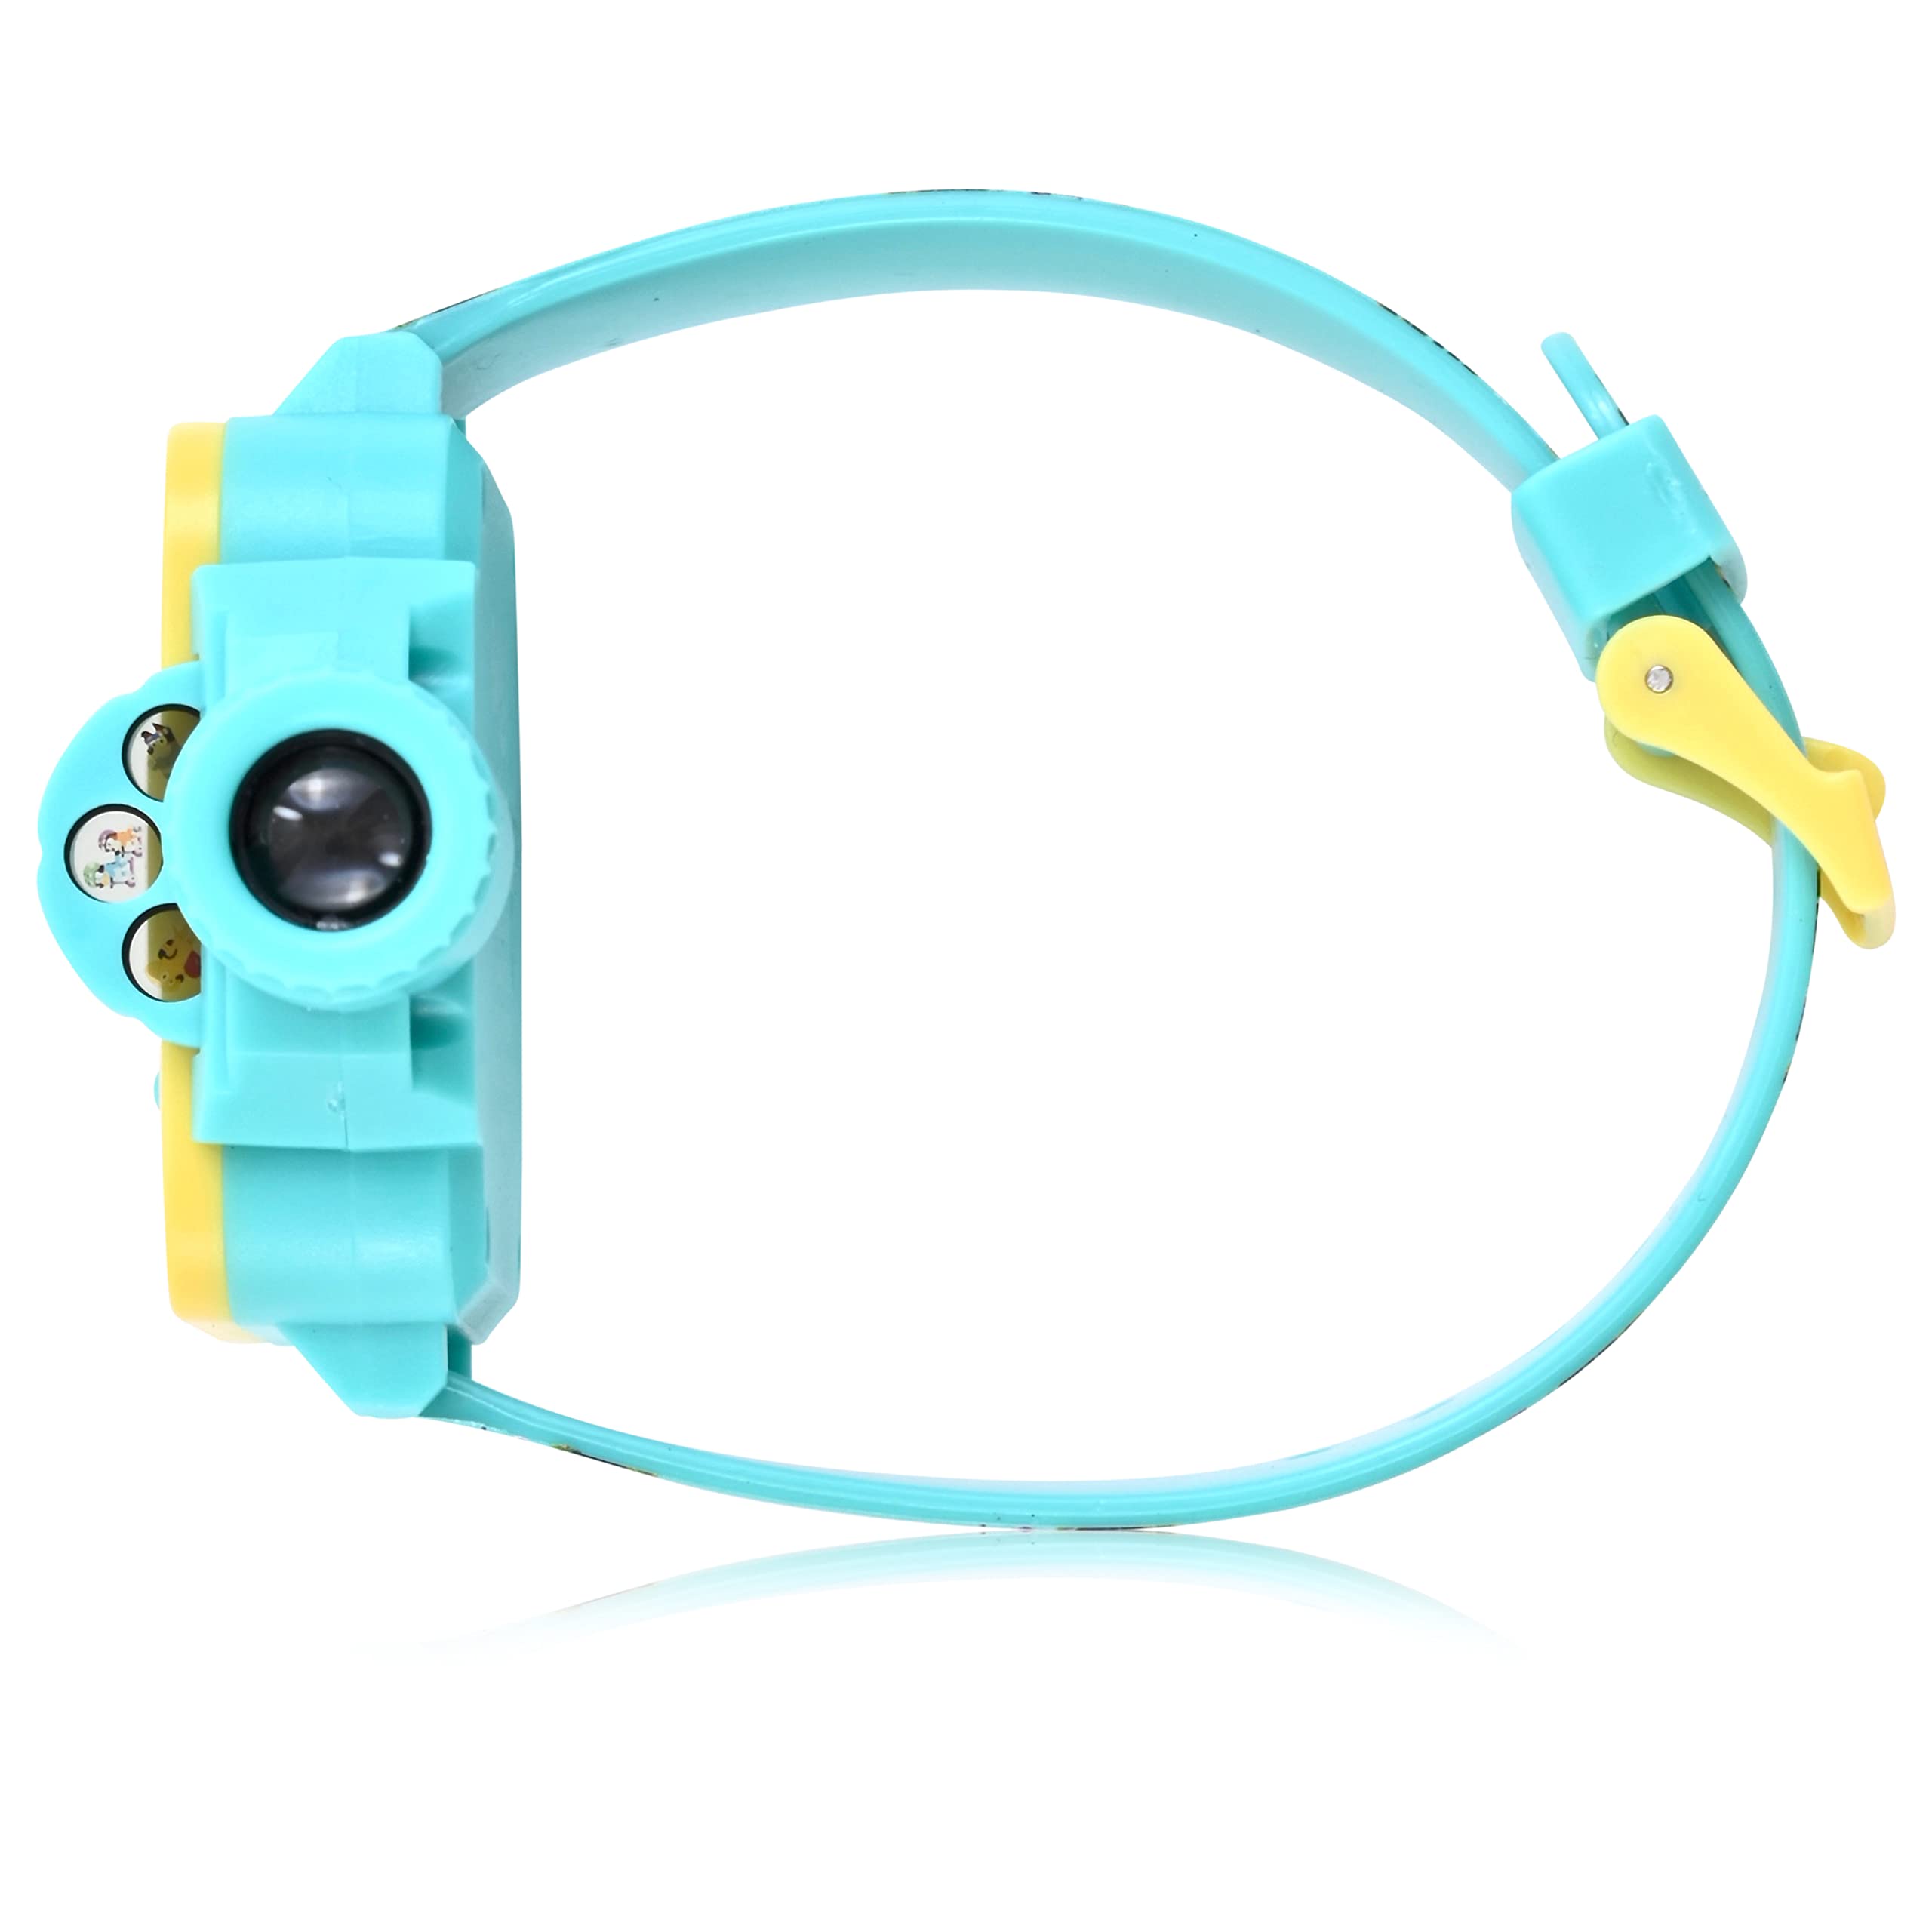 Accutime Bluey Kids Digital Watch - Side Projection Light with 6 Pictures, LCD Watch Display, Kids, Girls Or Boys Watch, Plastic Strap, in Green (Model: BLY4024AZ)